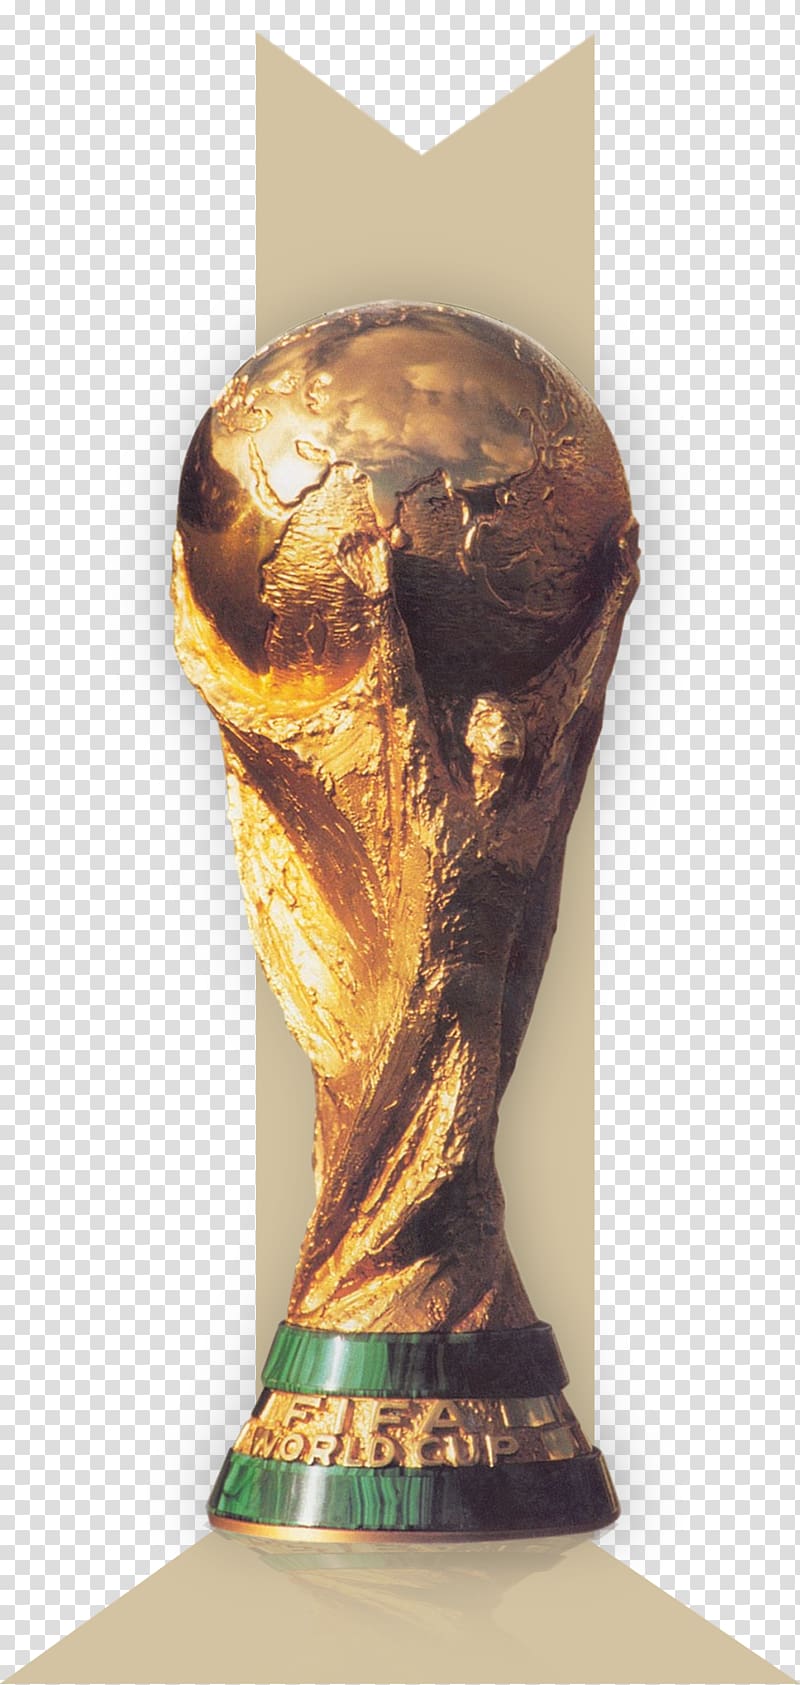 2018 World Cup 1930 FIFA World Cup 2014 FIFA World Cup FIFA World Cup Trophy Brazil national football team, football transparent background PNG clipart